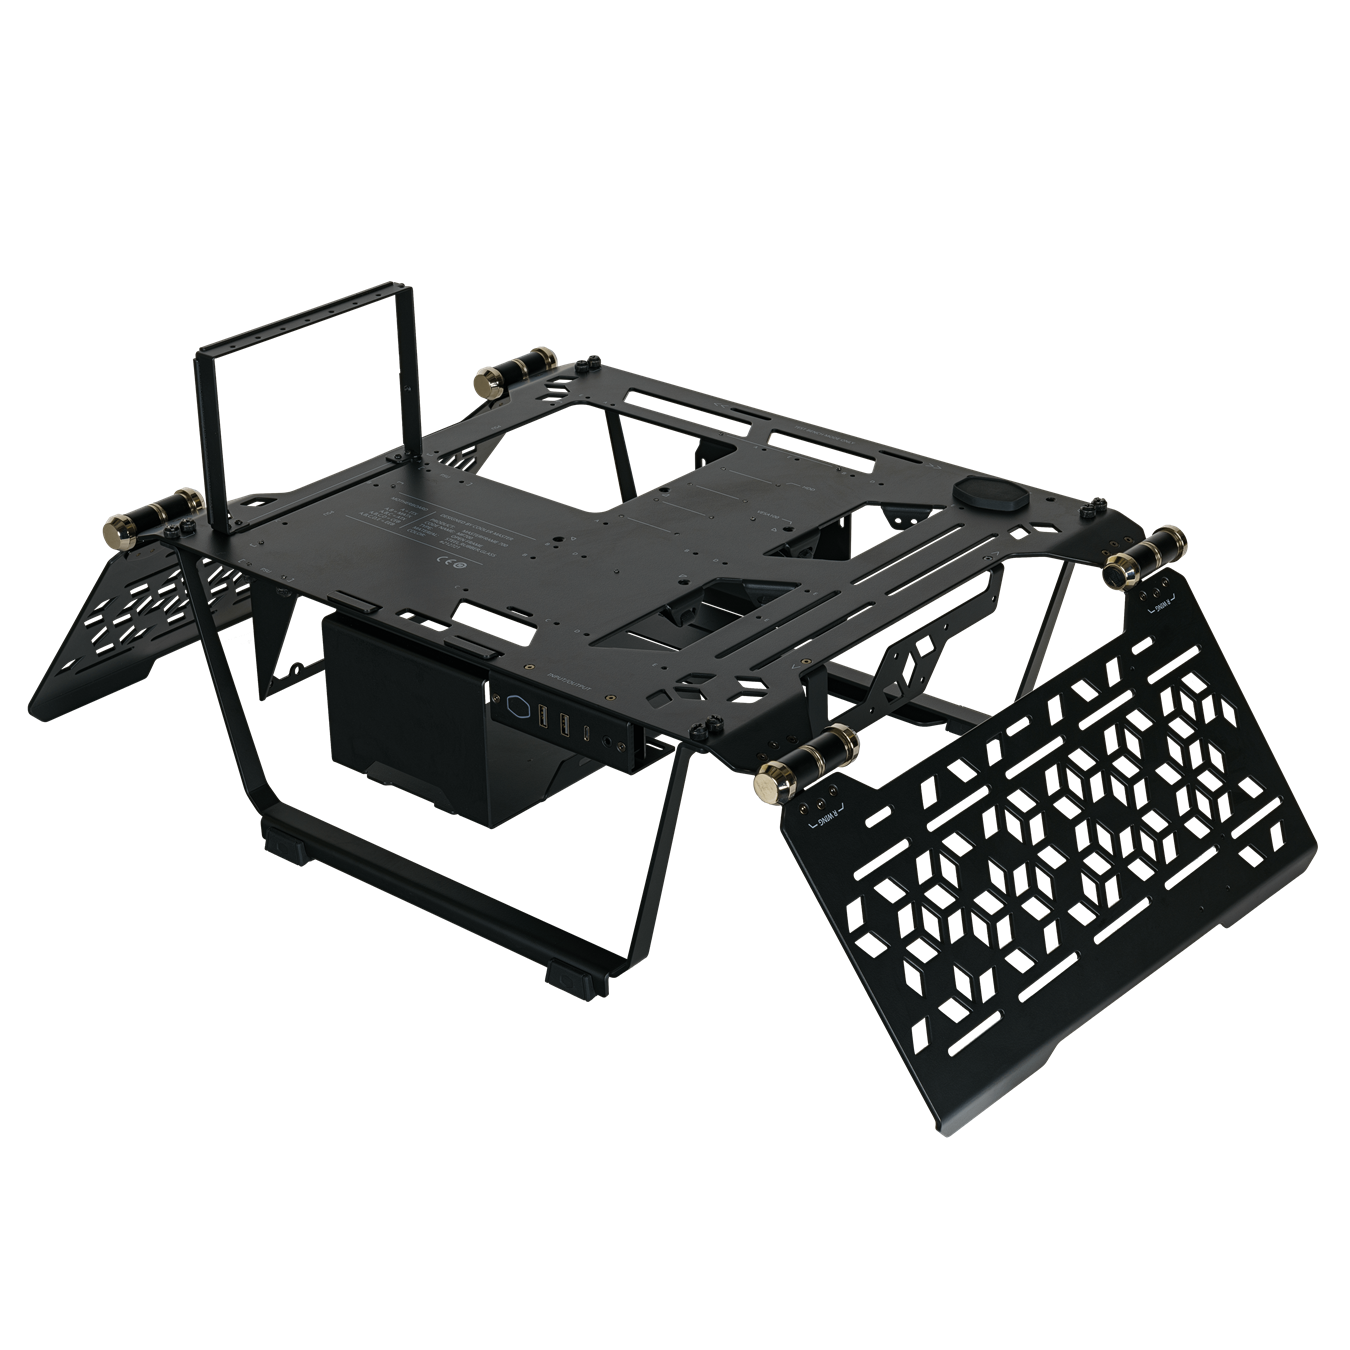 MasterFrame 700 can lay down horizontally and transform into an ultra-featured premium Test Bench.